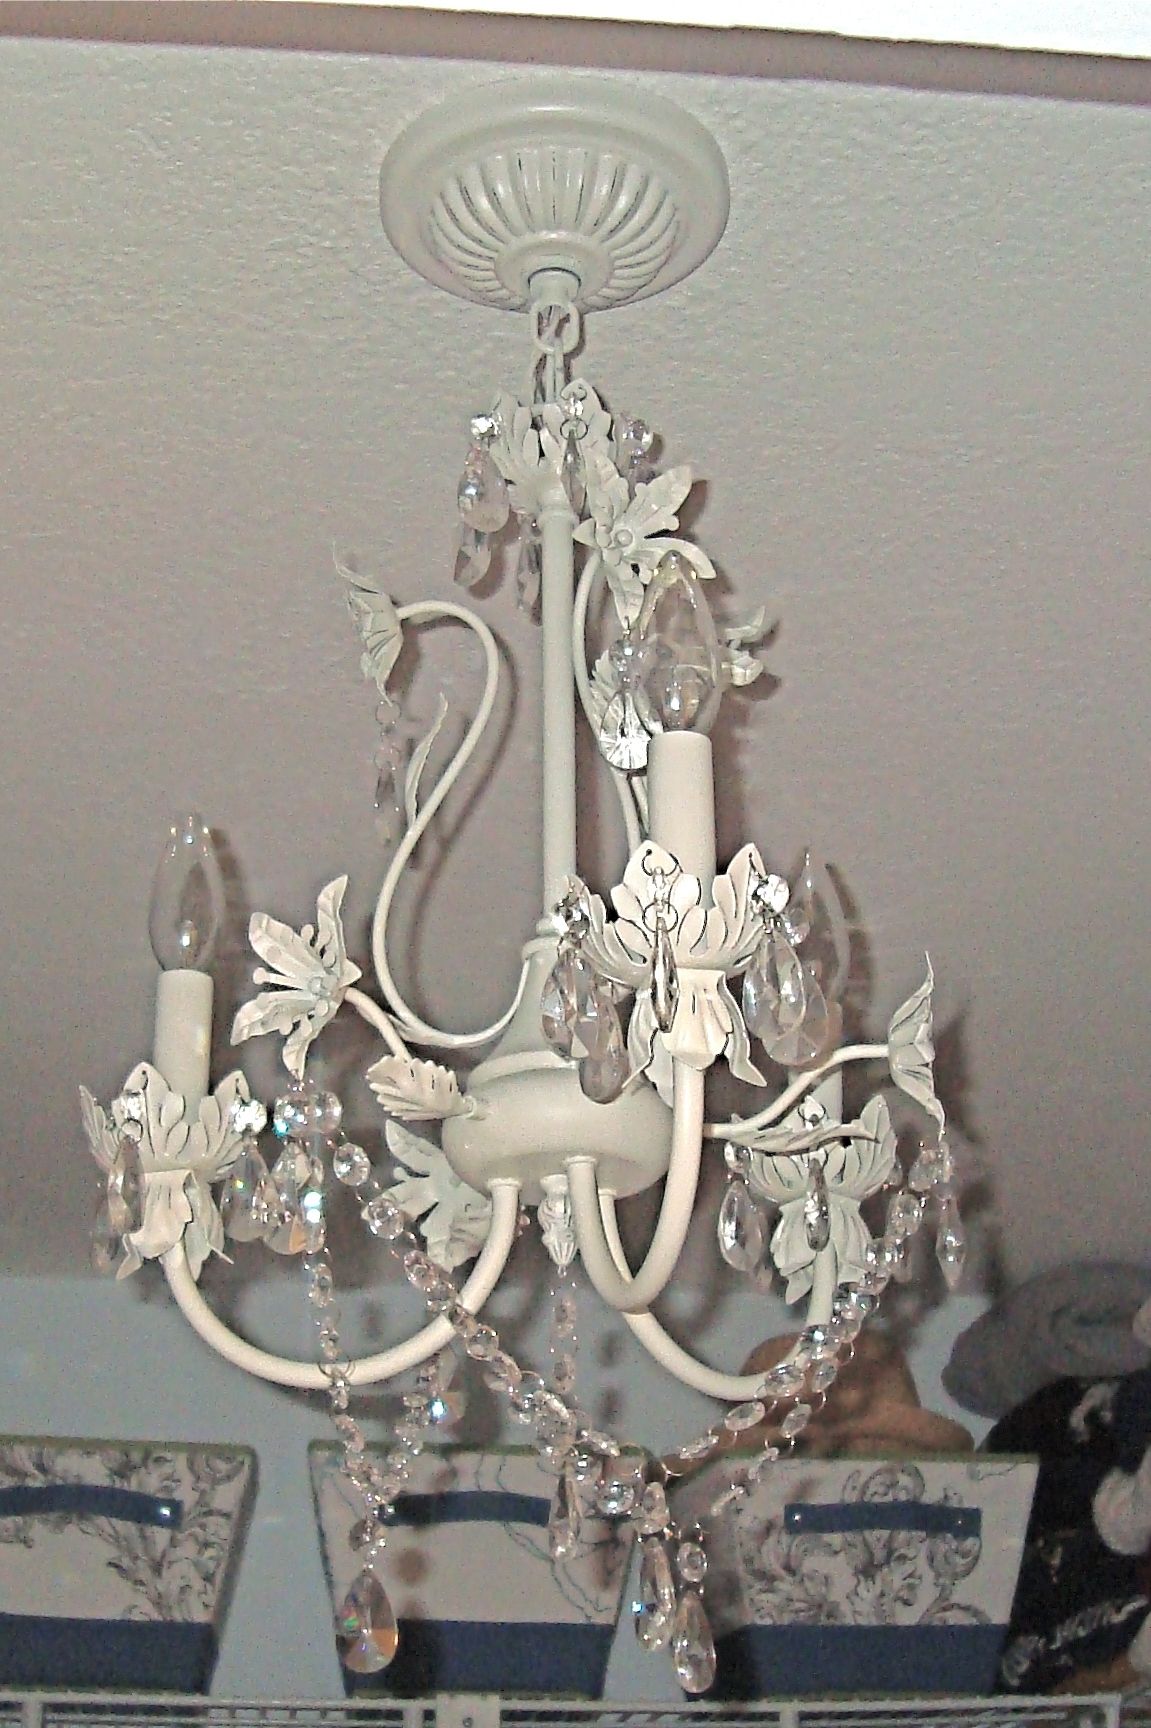 Lamp Chandelier Shabby Chic – Closdurocnoir Throughout Trendy Shabby Chic Chandeliers (View 11 of 15)